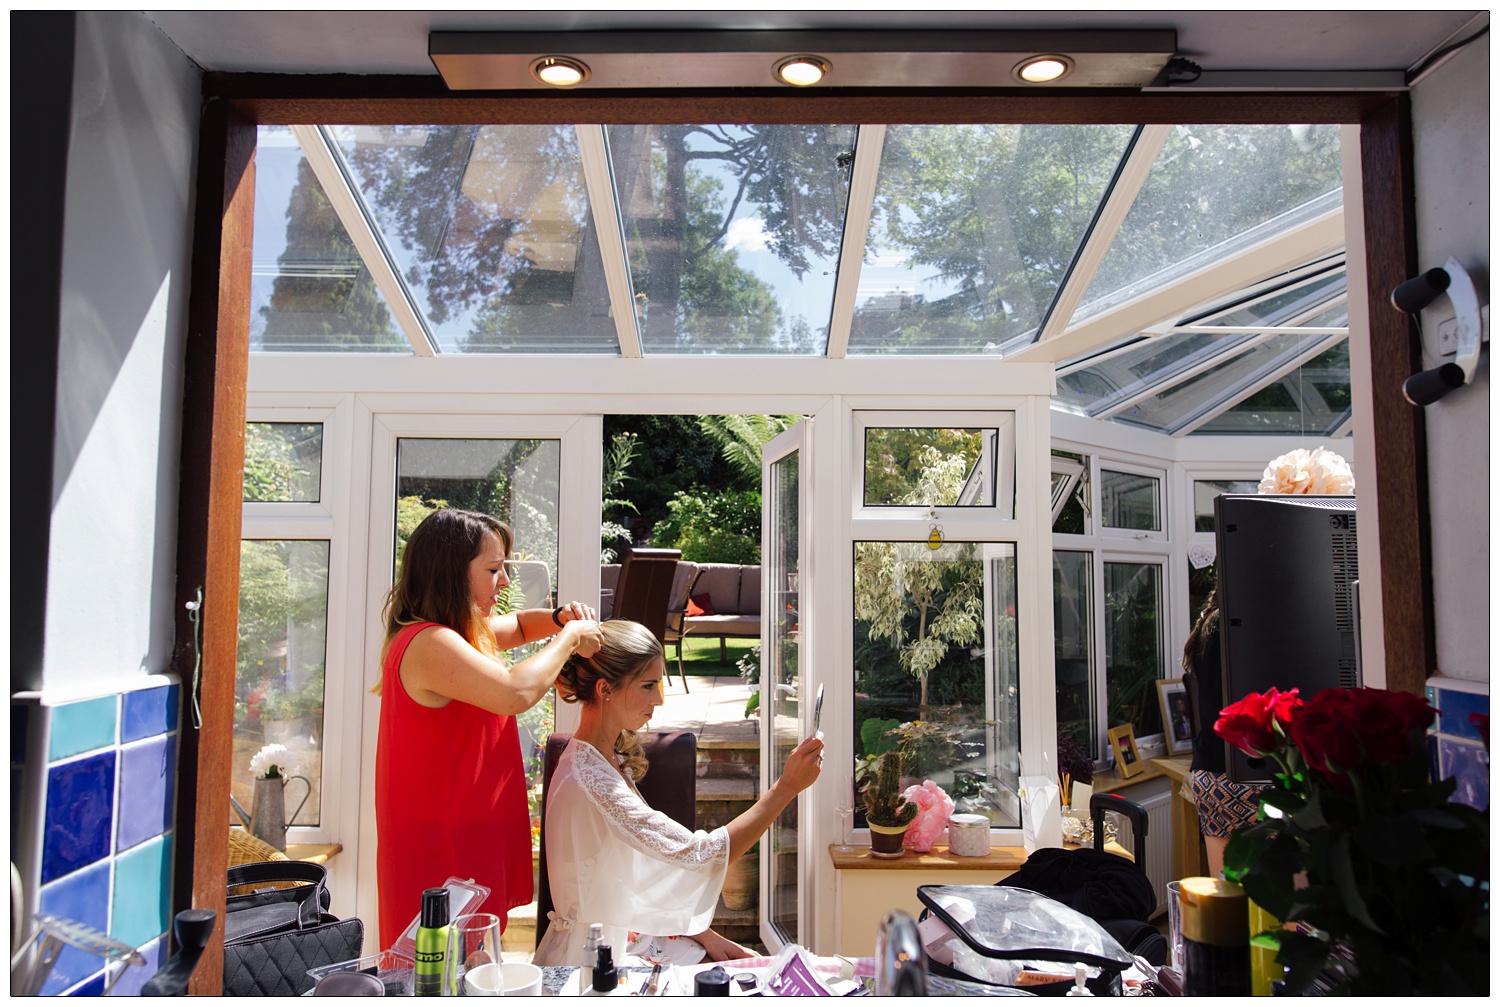 In a conservatory at home a woman is having her hair done.